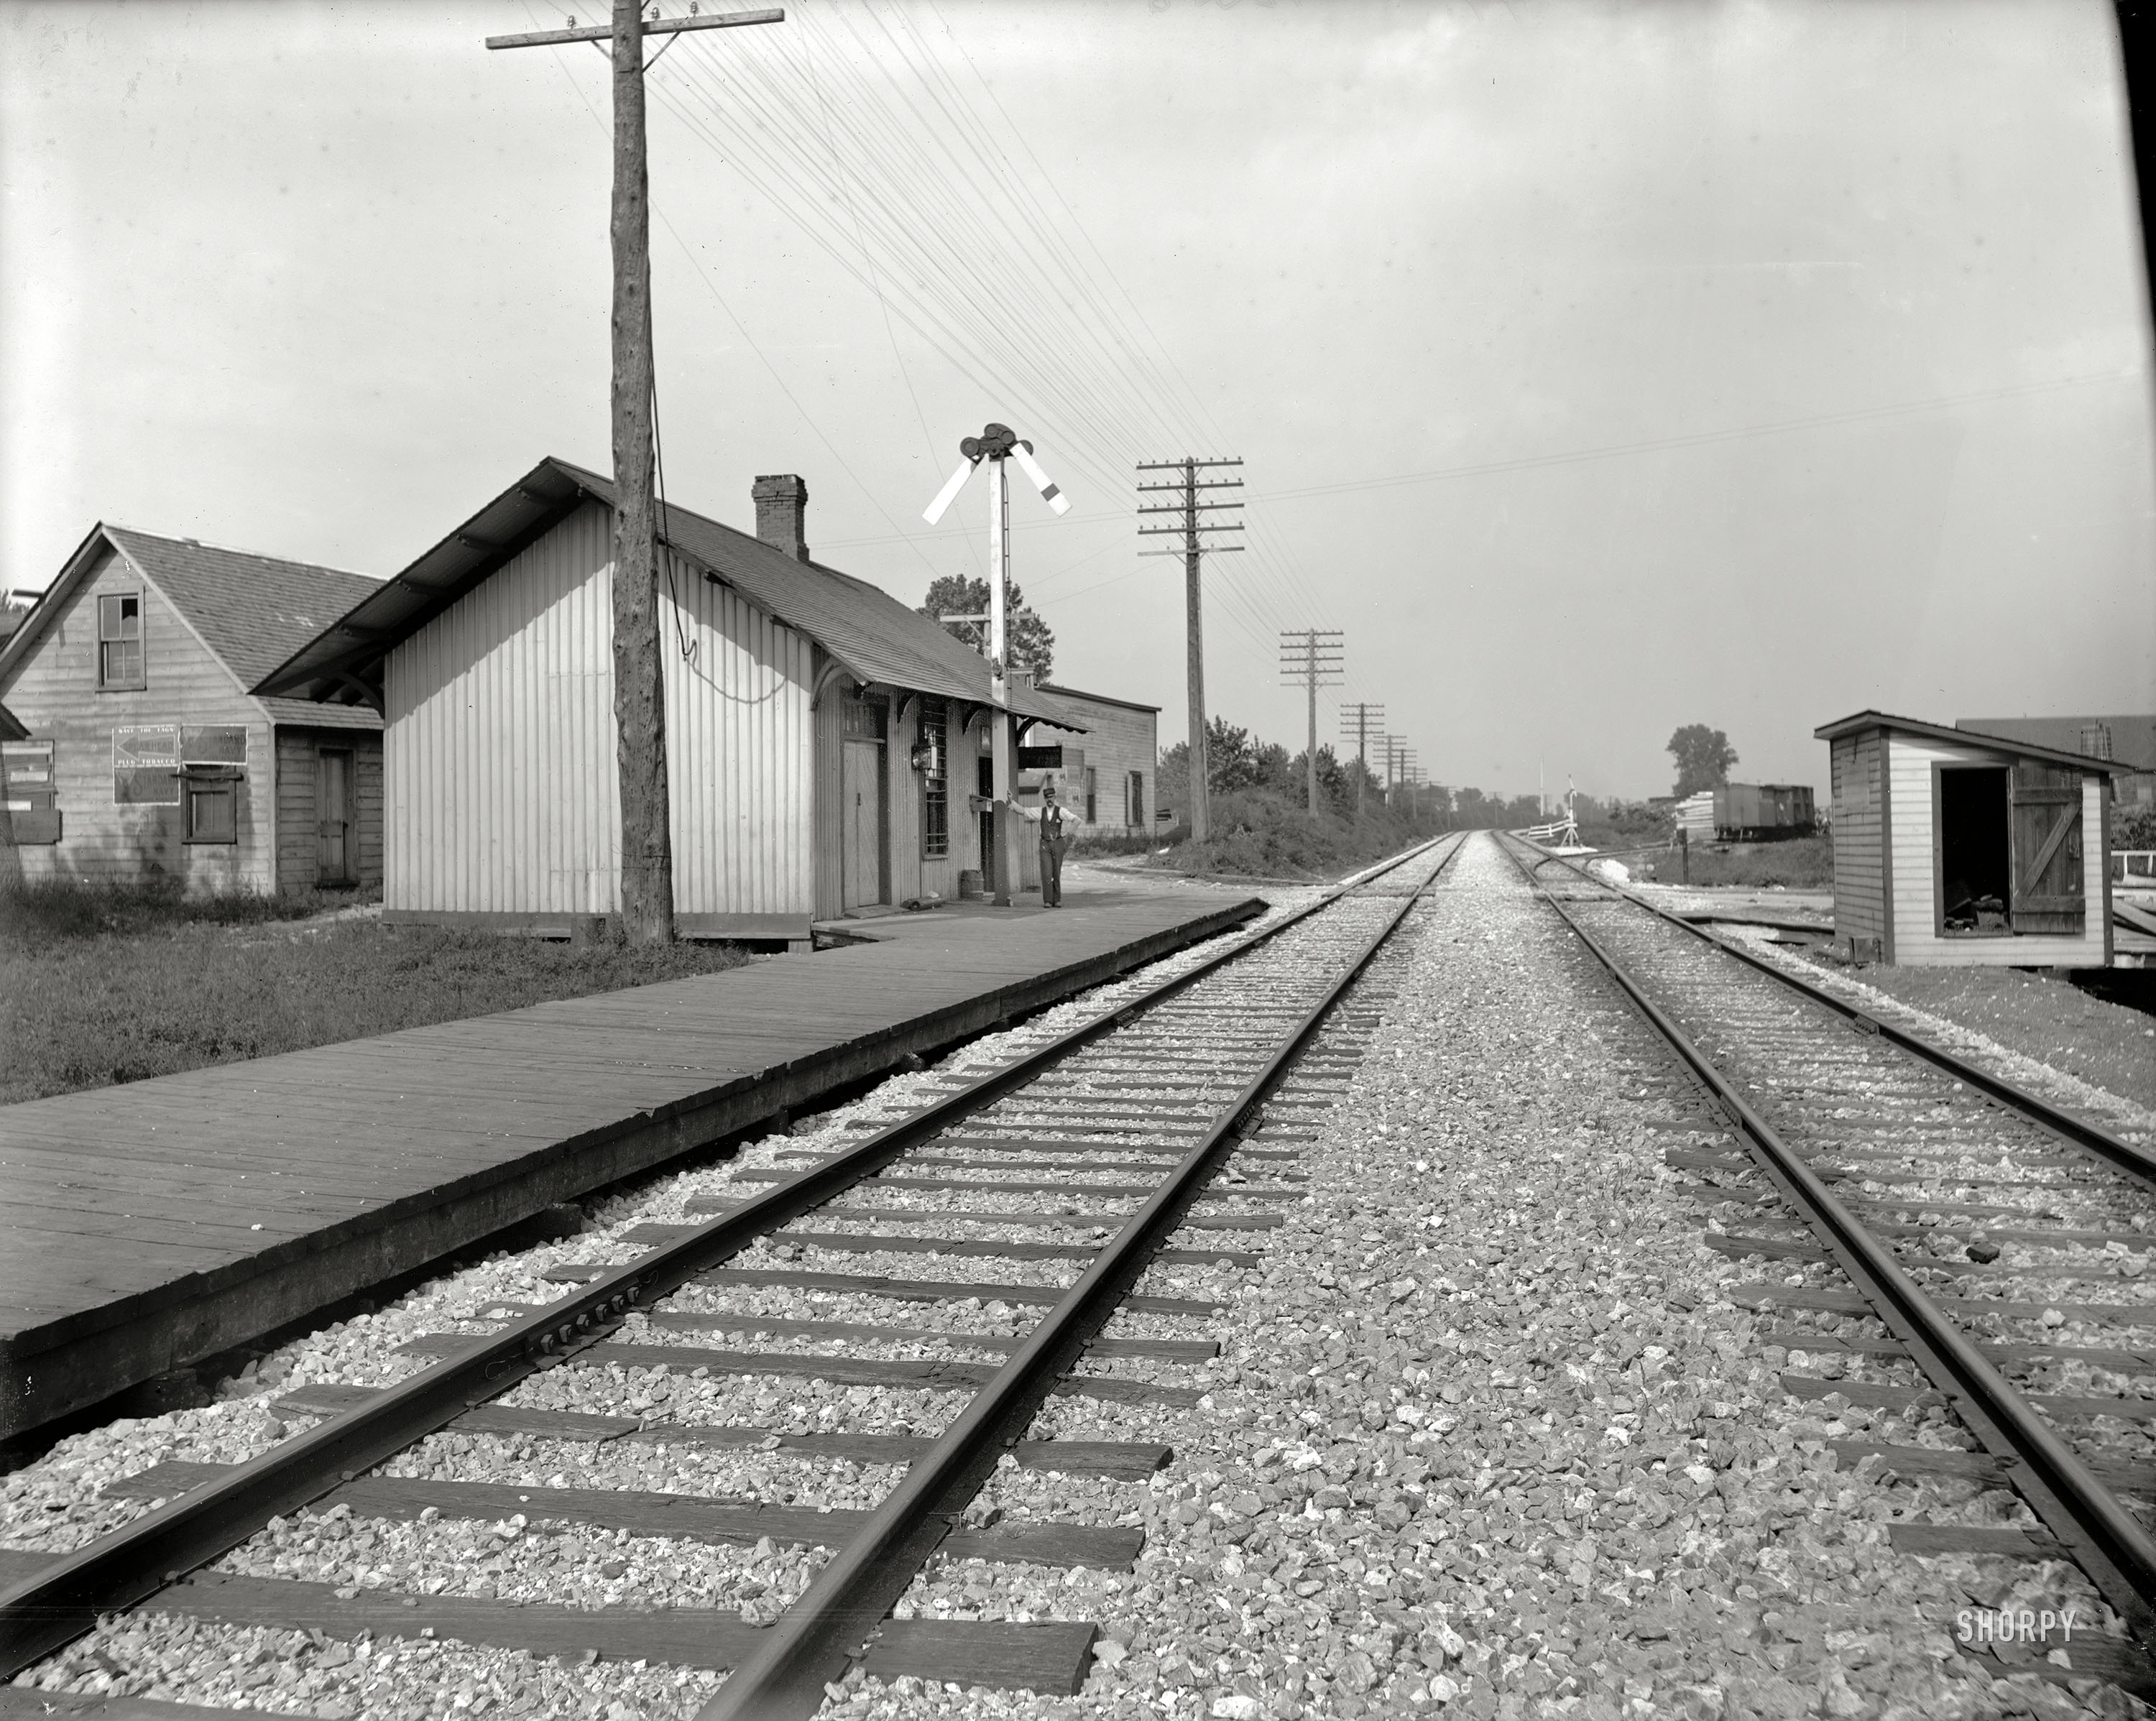 Circa 1900. "Station at Willow Springs, Illinois." 8x10 inch dry plate glass negative, Detroit Publishing Company. View full size.